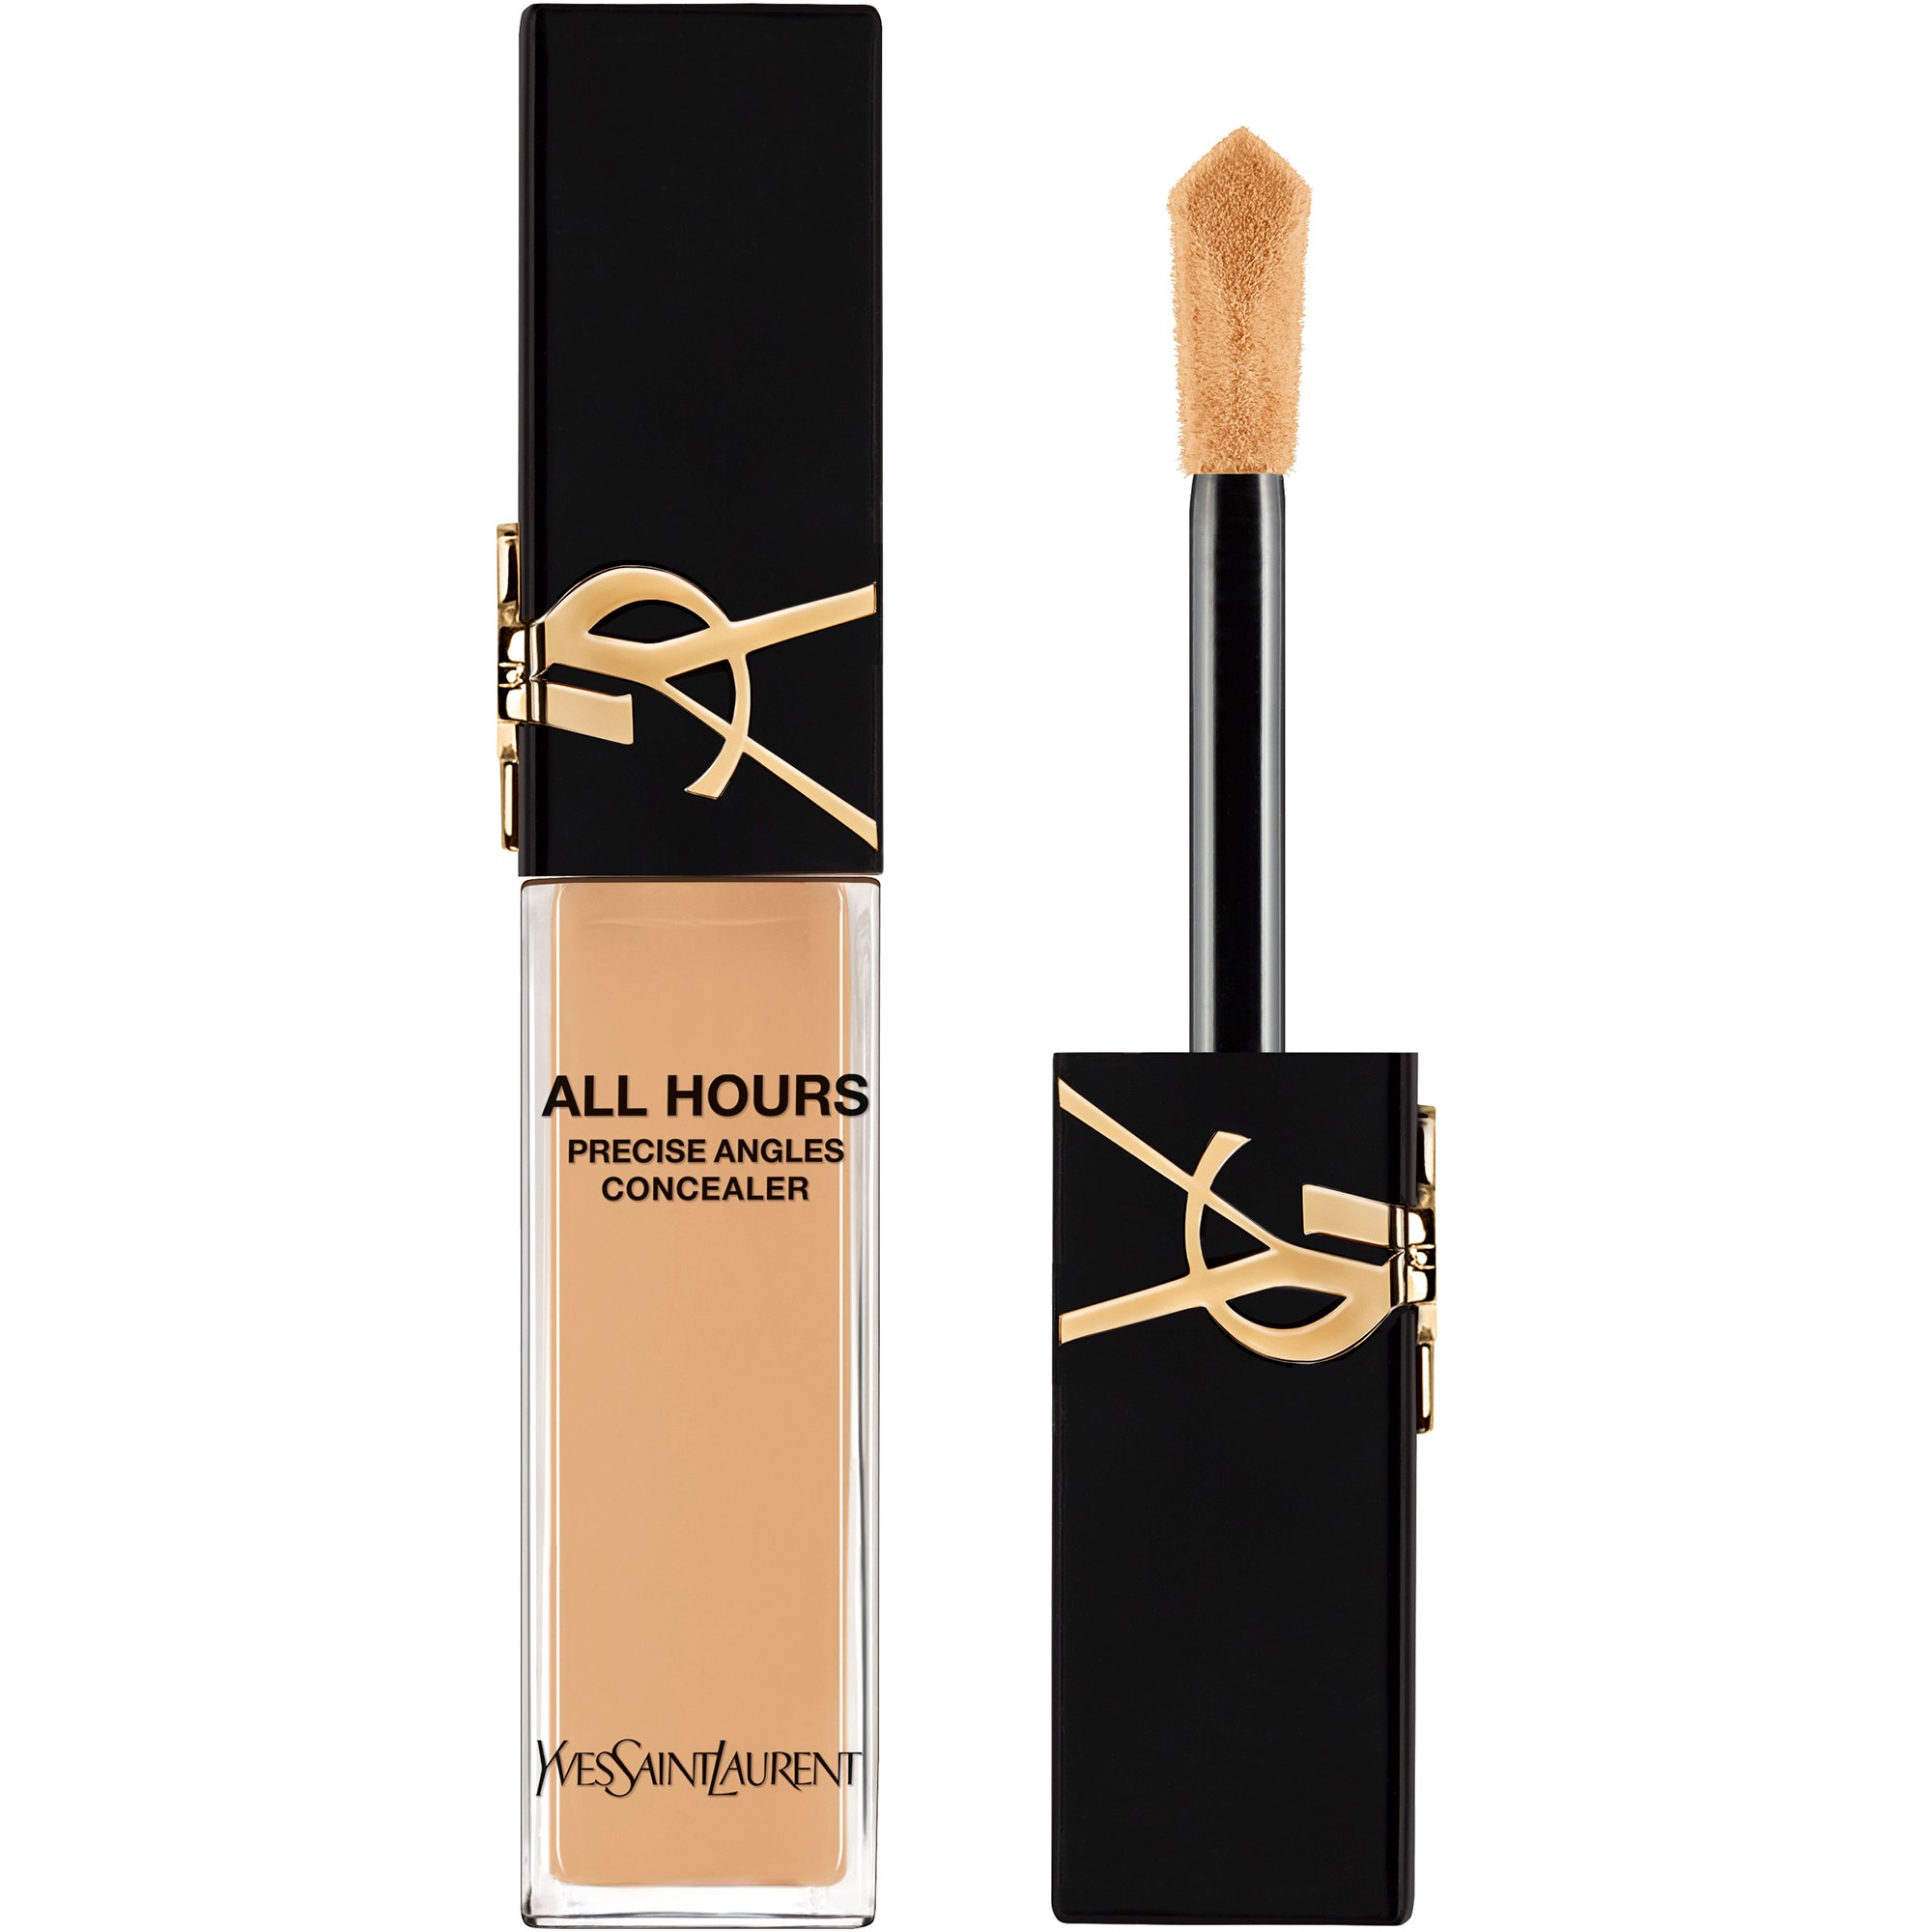 Yves Saint Laurent All Hours Precise Angles Concealer LW7